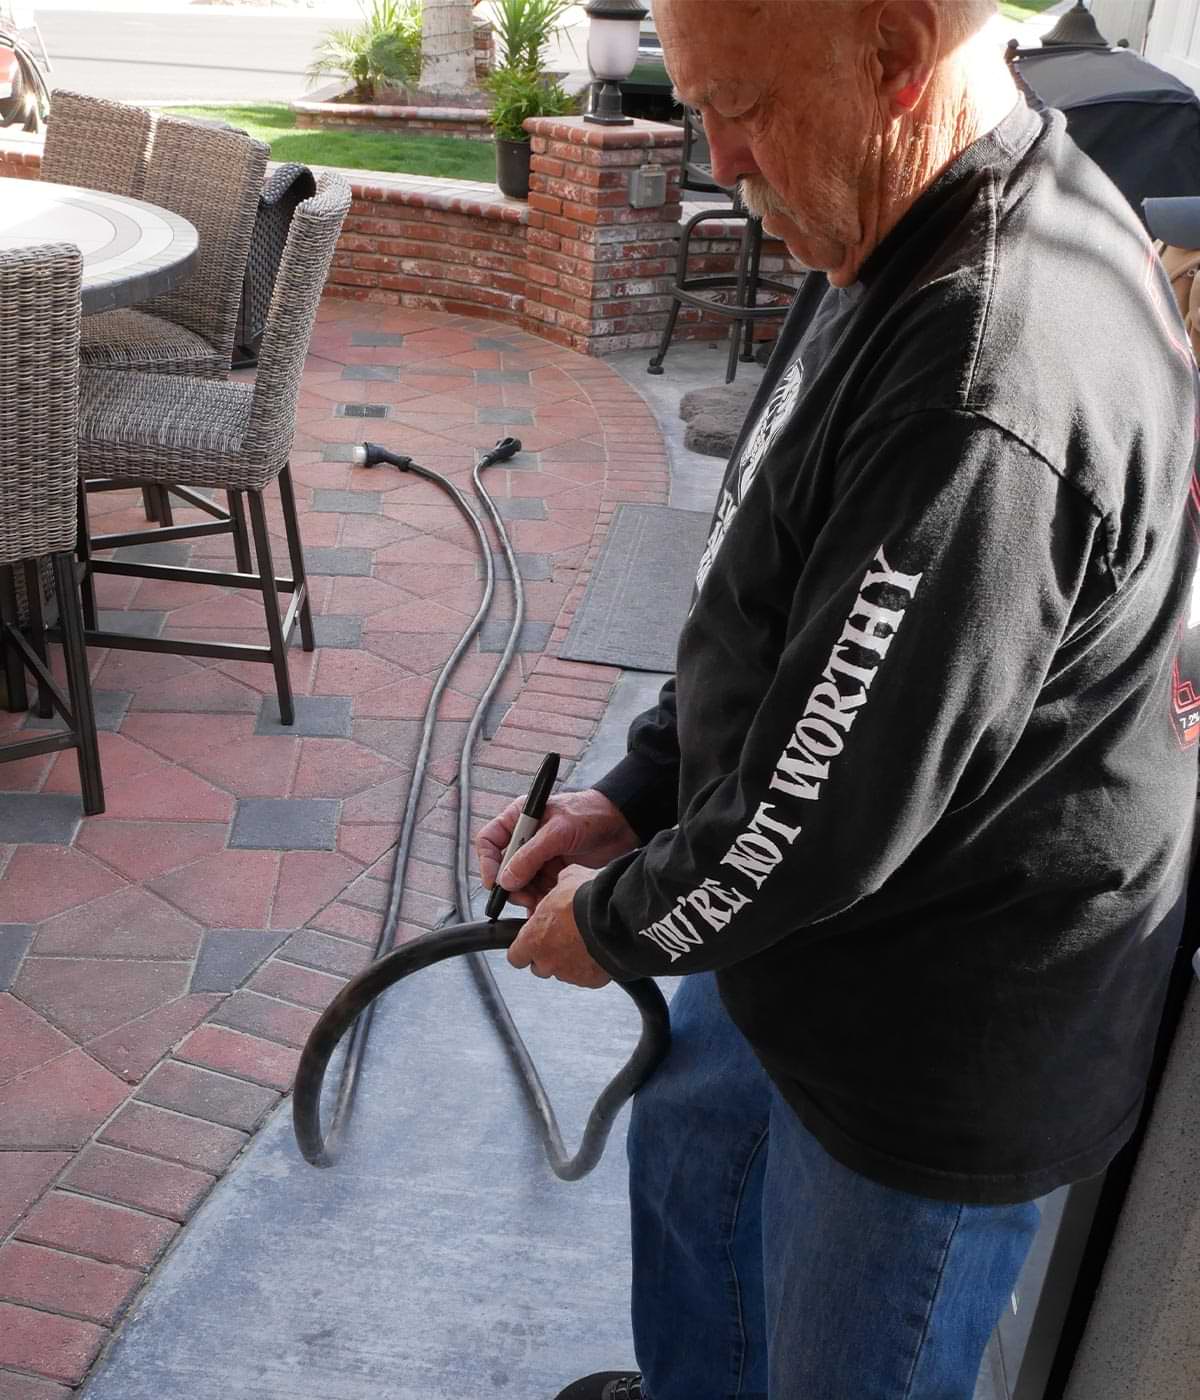 RV technician marks the center point of the 50-amp power cord with a sharpie